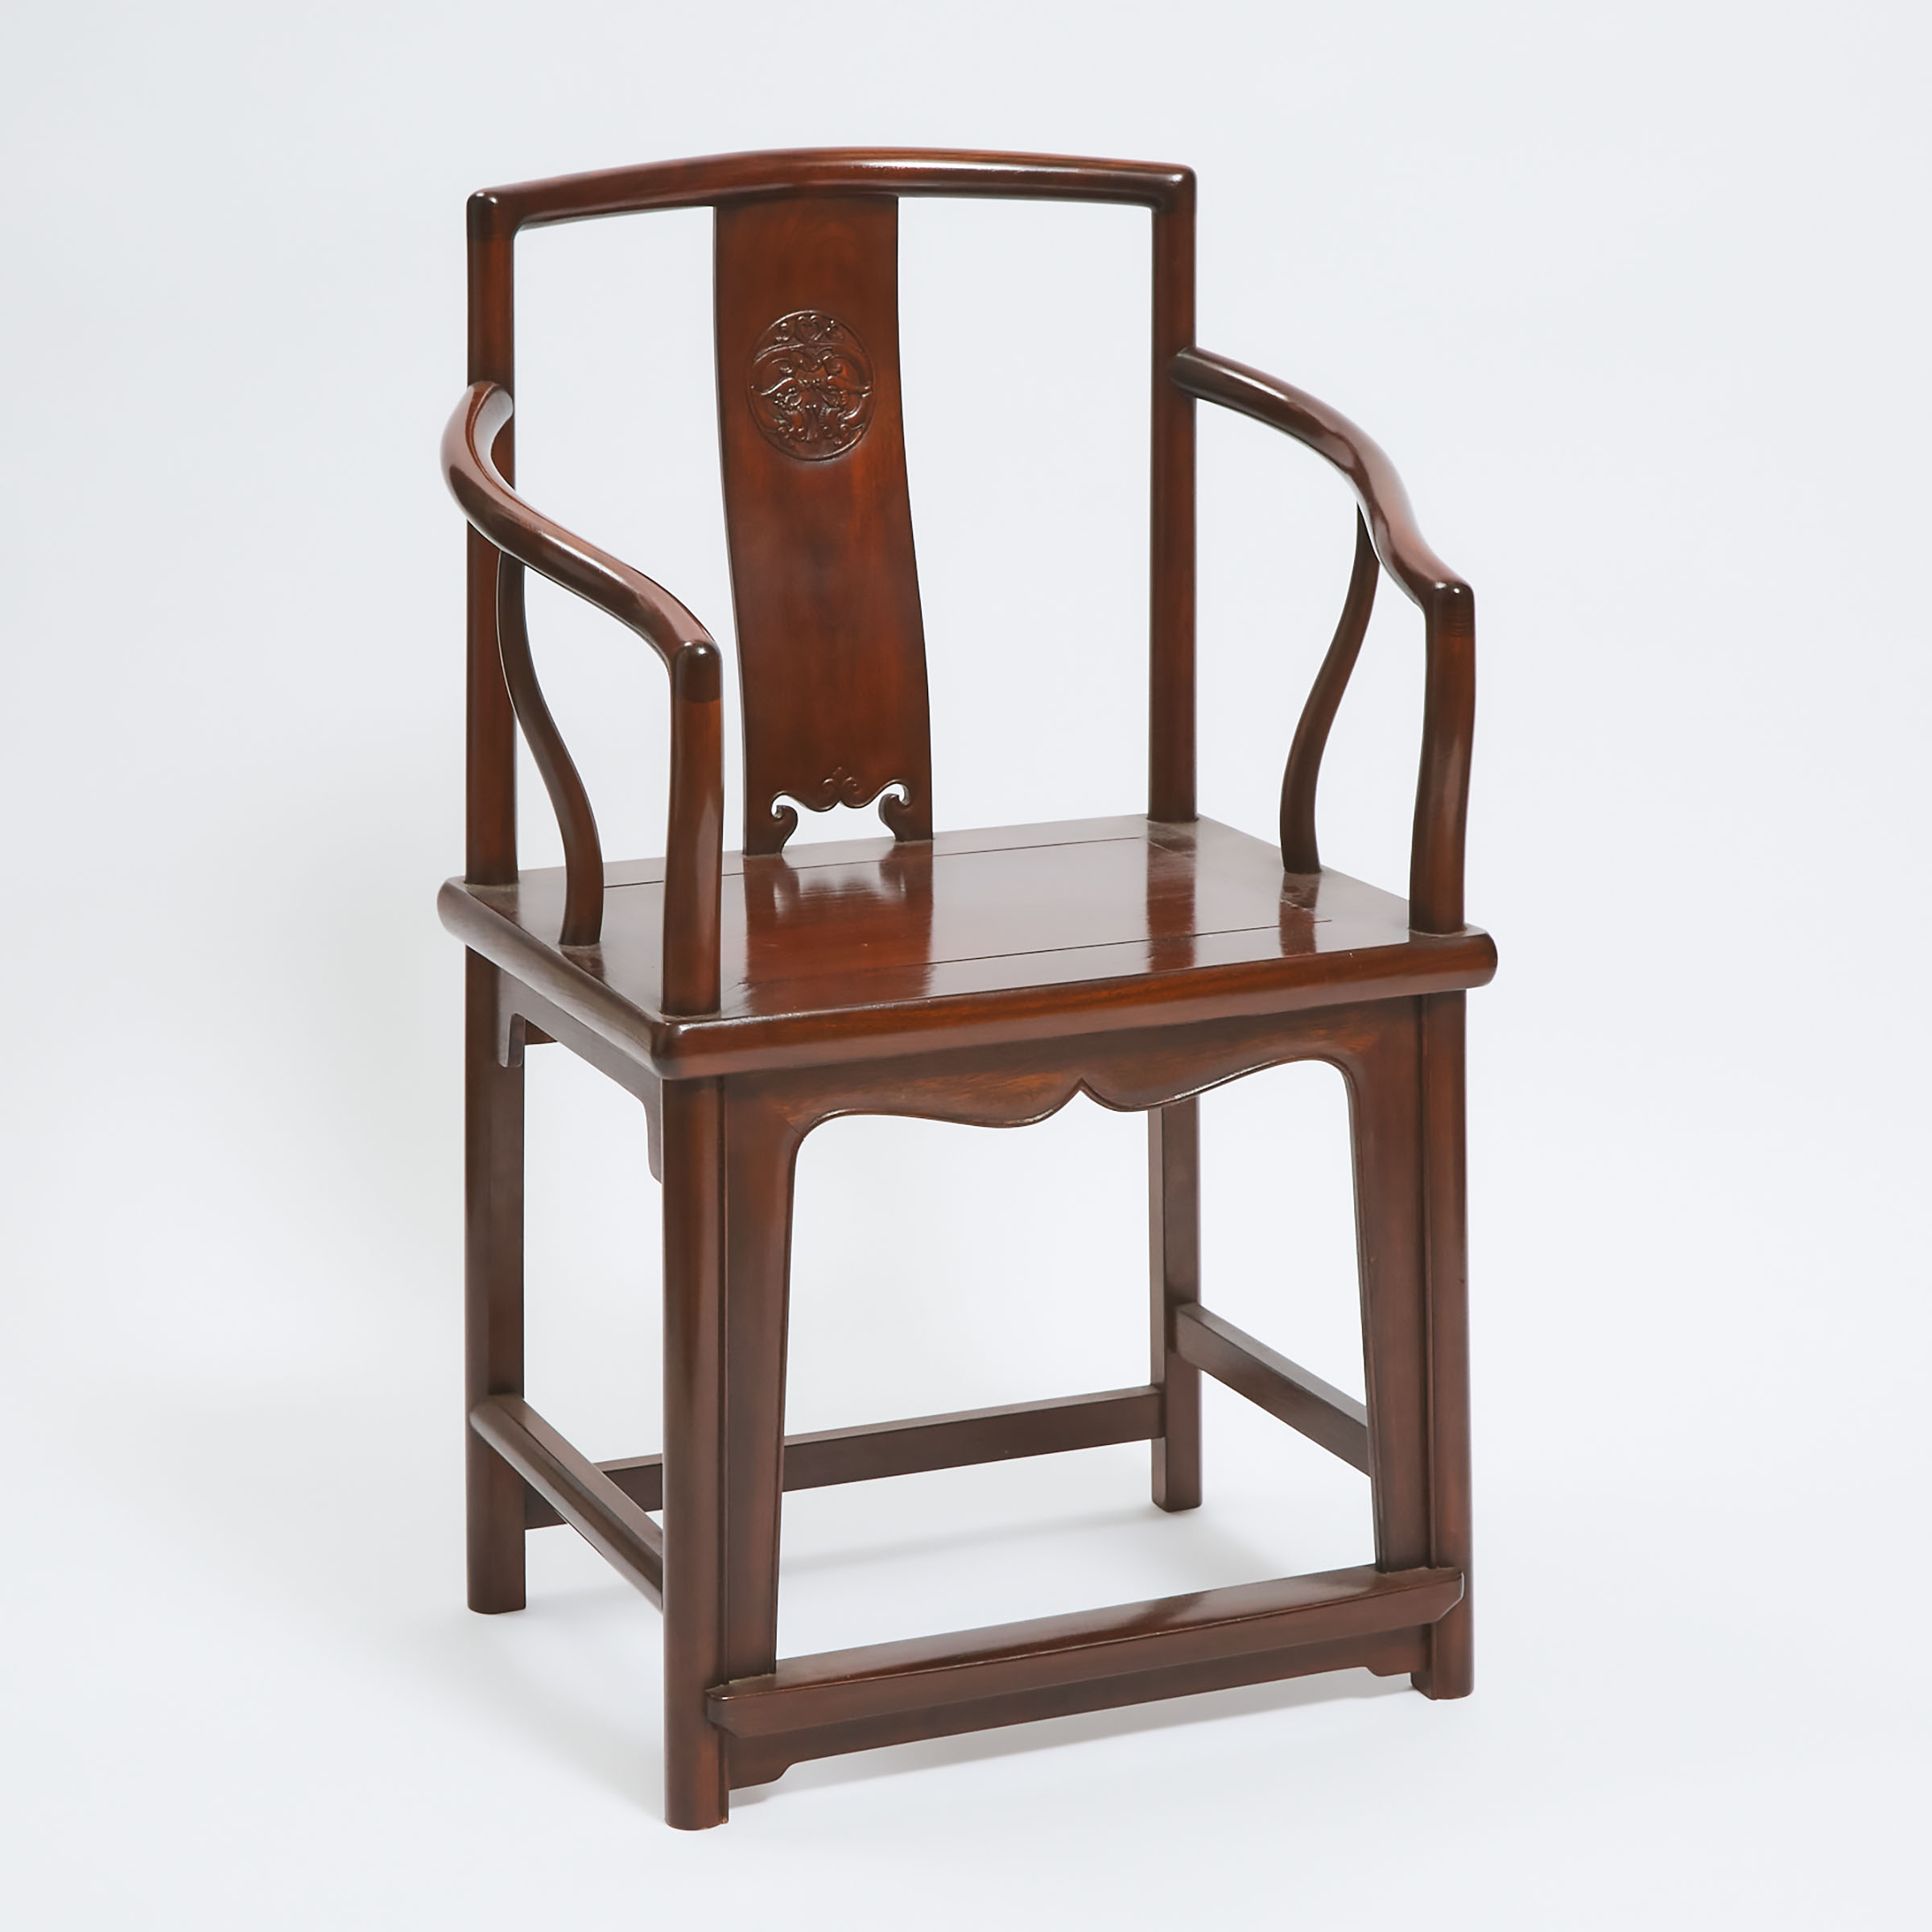 A Chinese Ming-Style Hardwood Chair, Early to Mid 20th Century